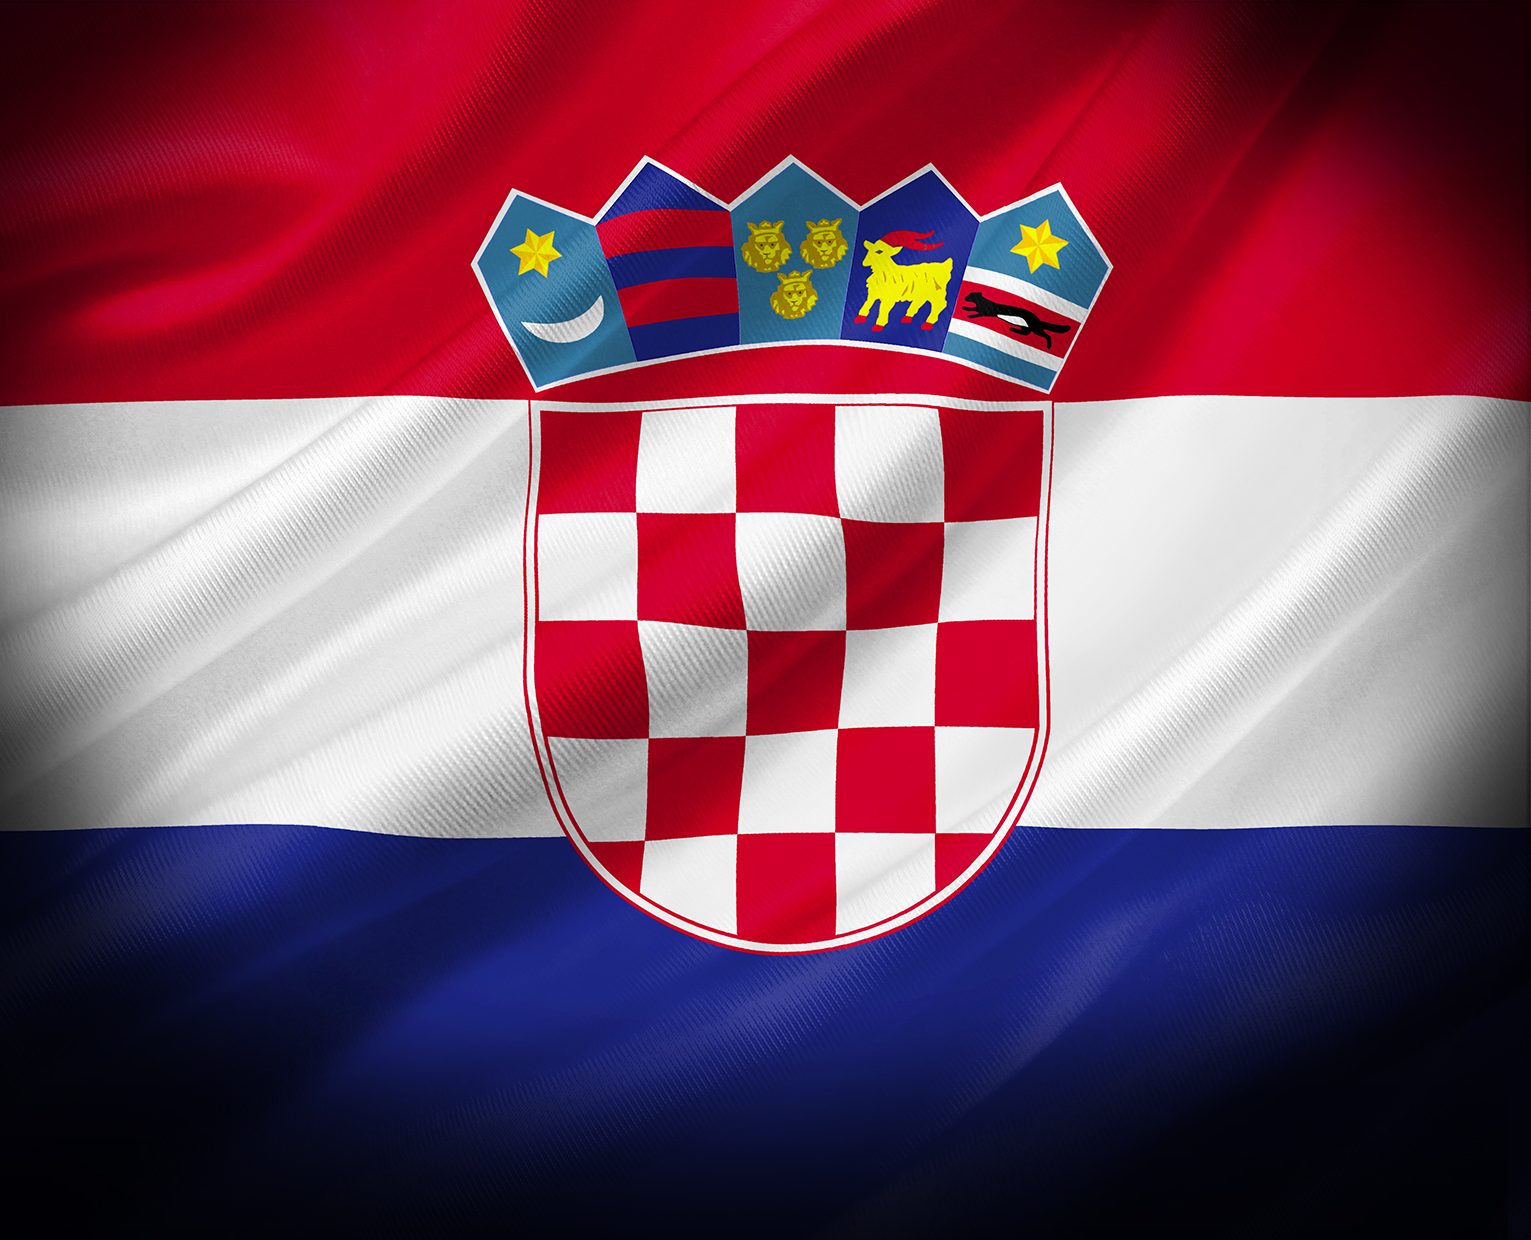 UK – IMG ARENA expands Croatian football rights package